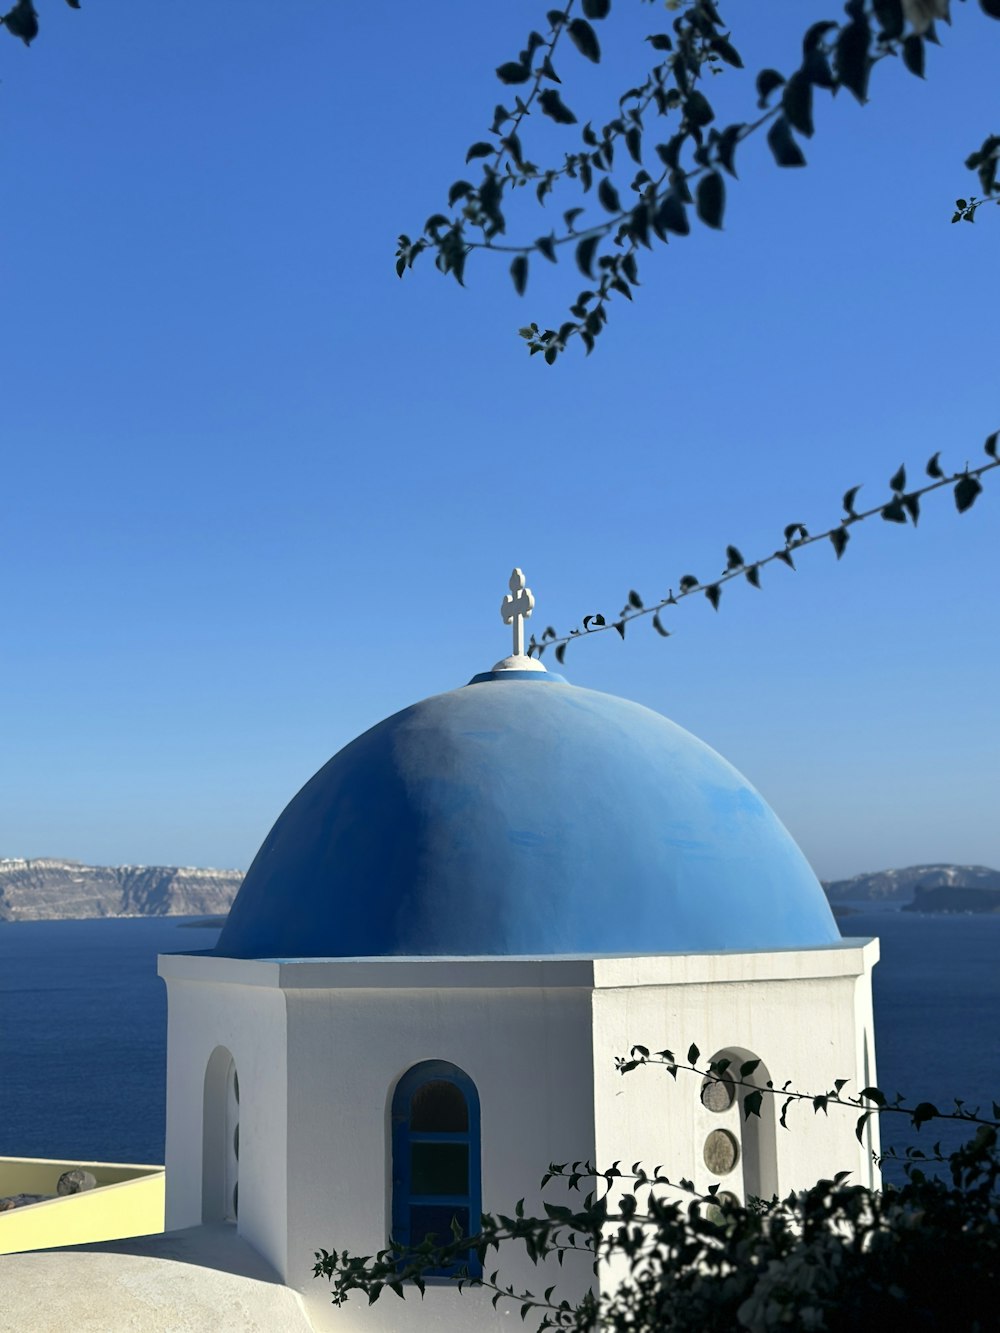 a white and blue building with a cross on top